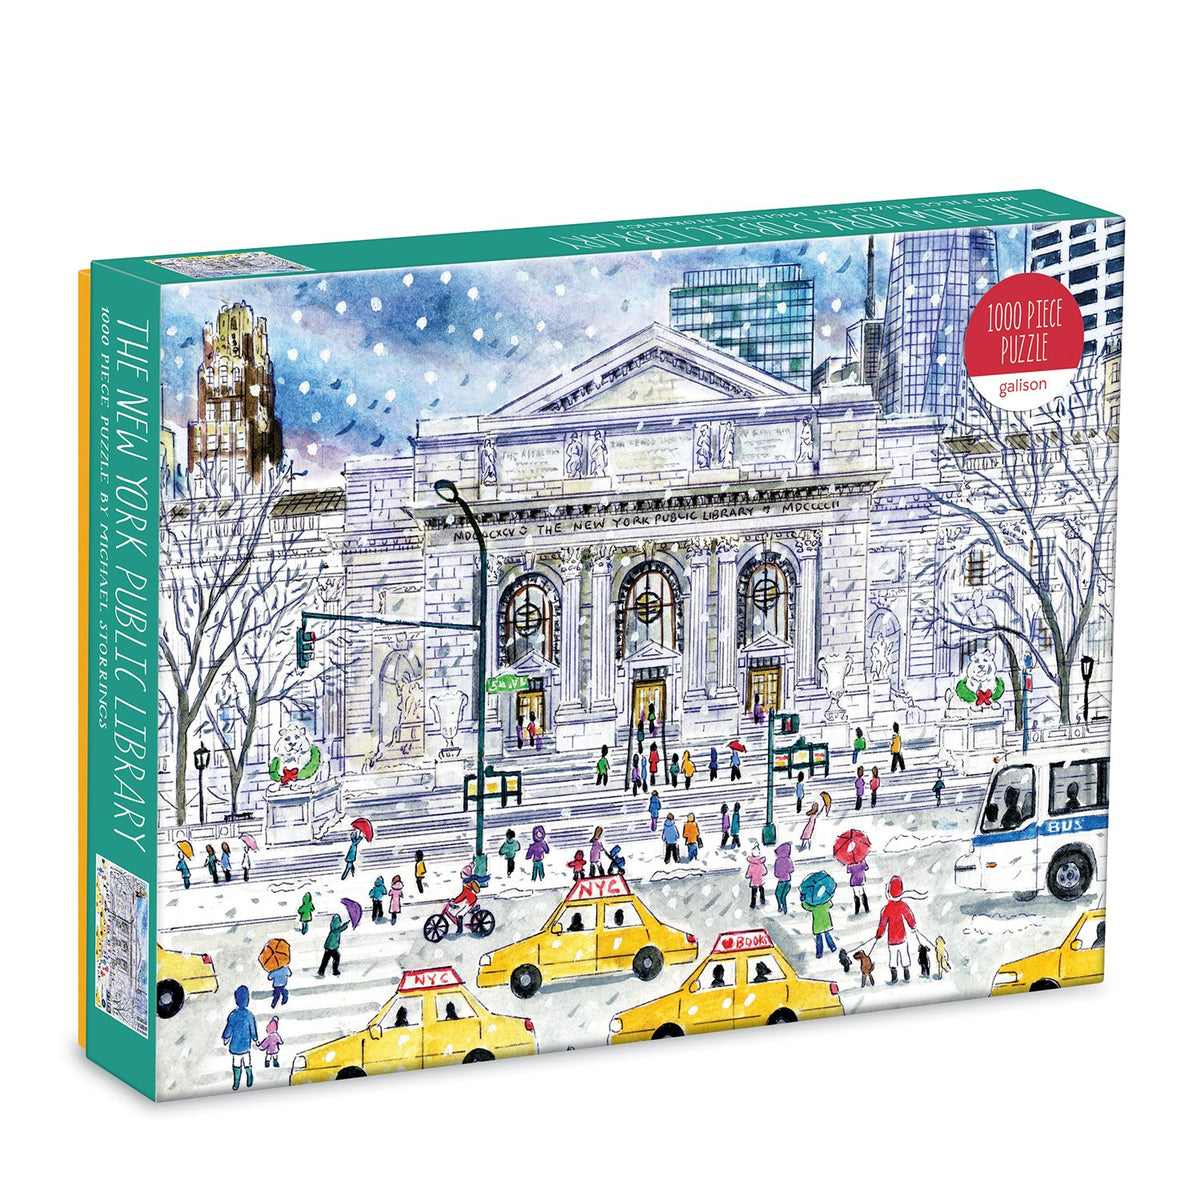 The most exciting catalog of jigsaw puzzles collections!